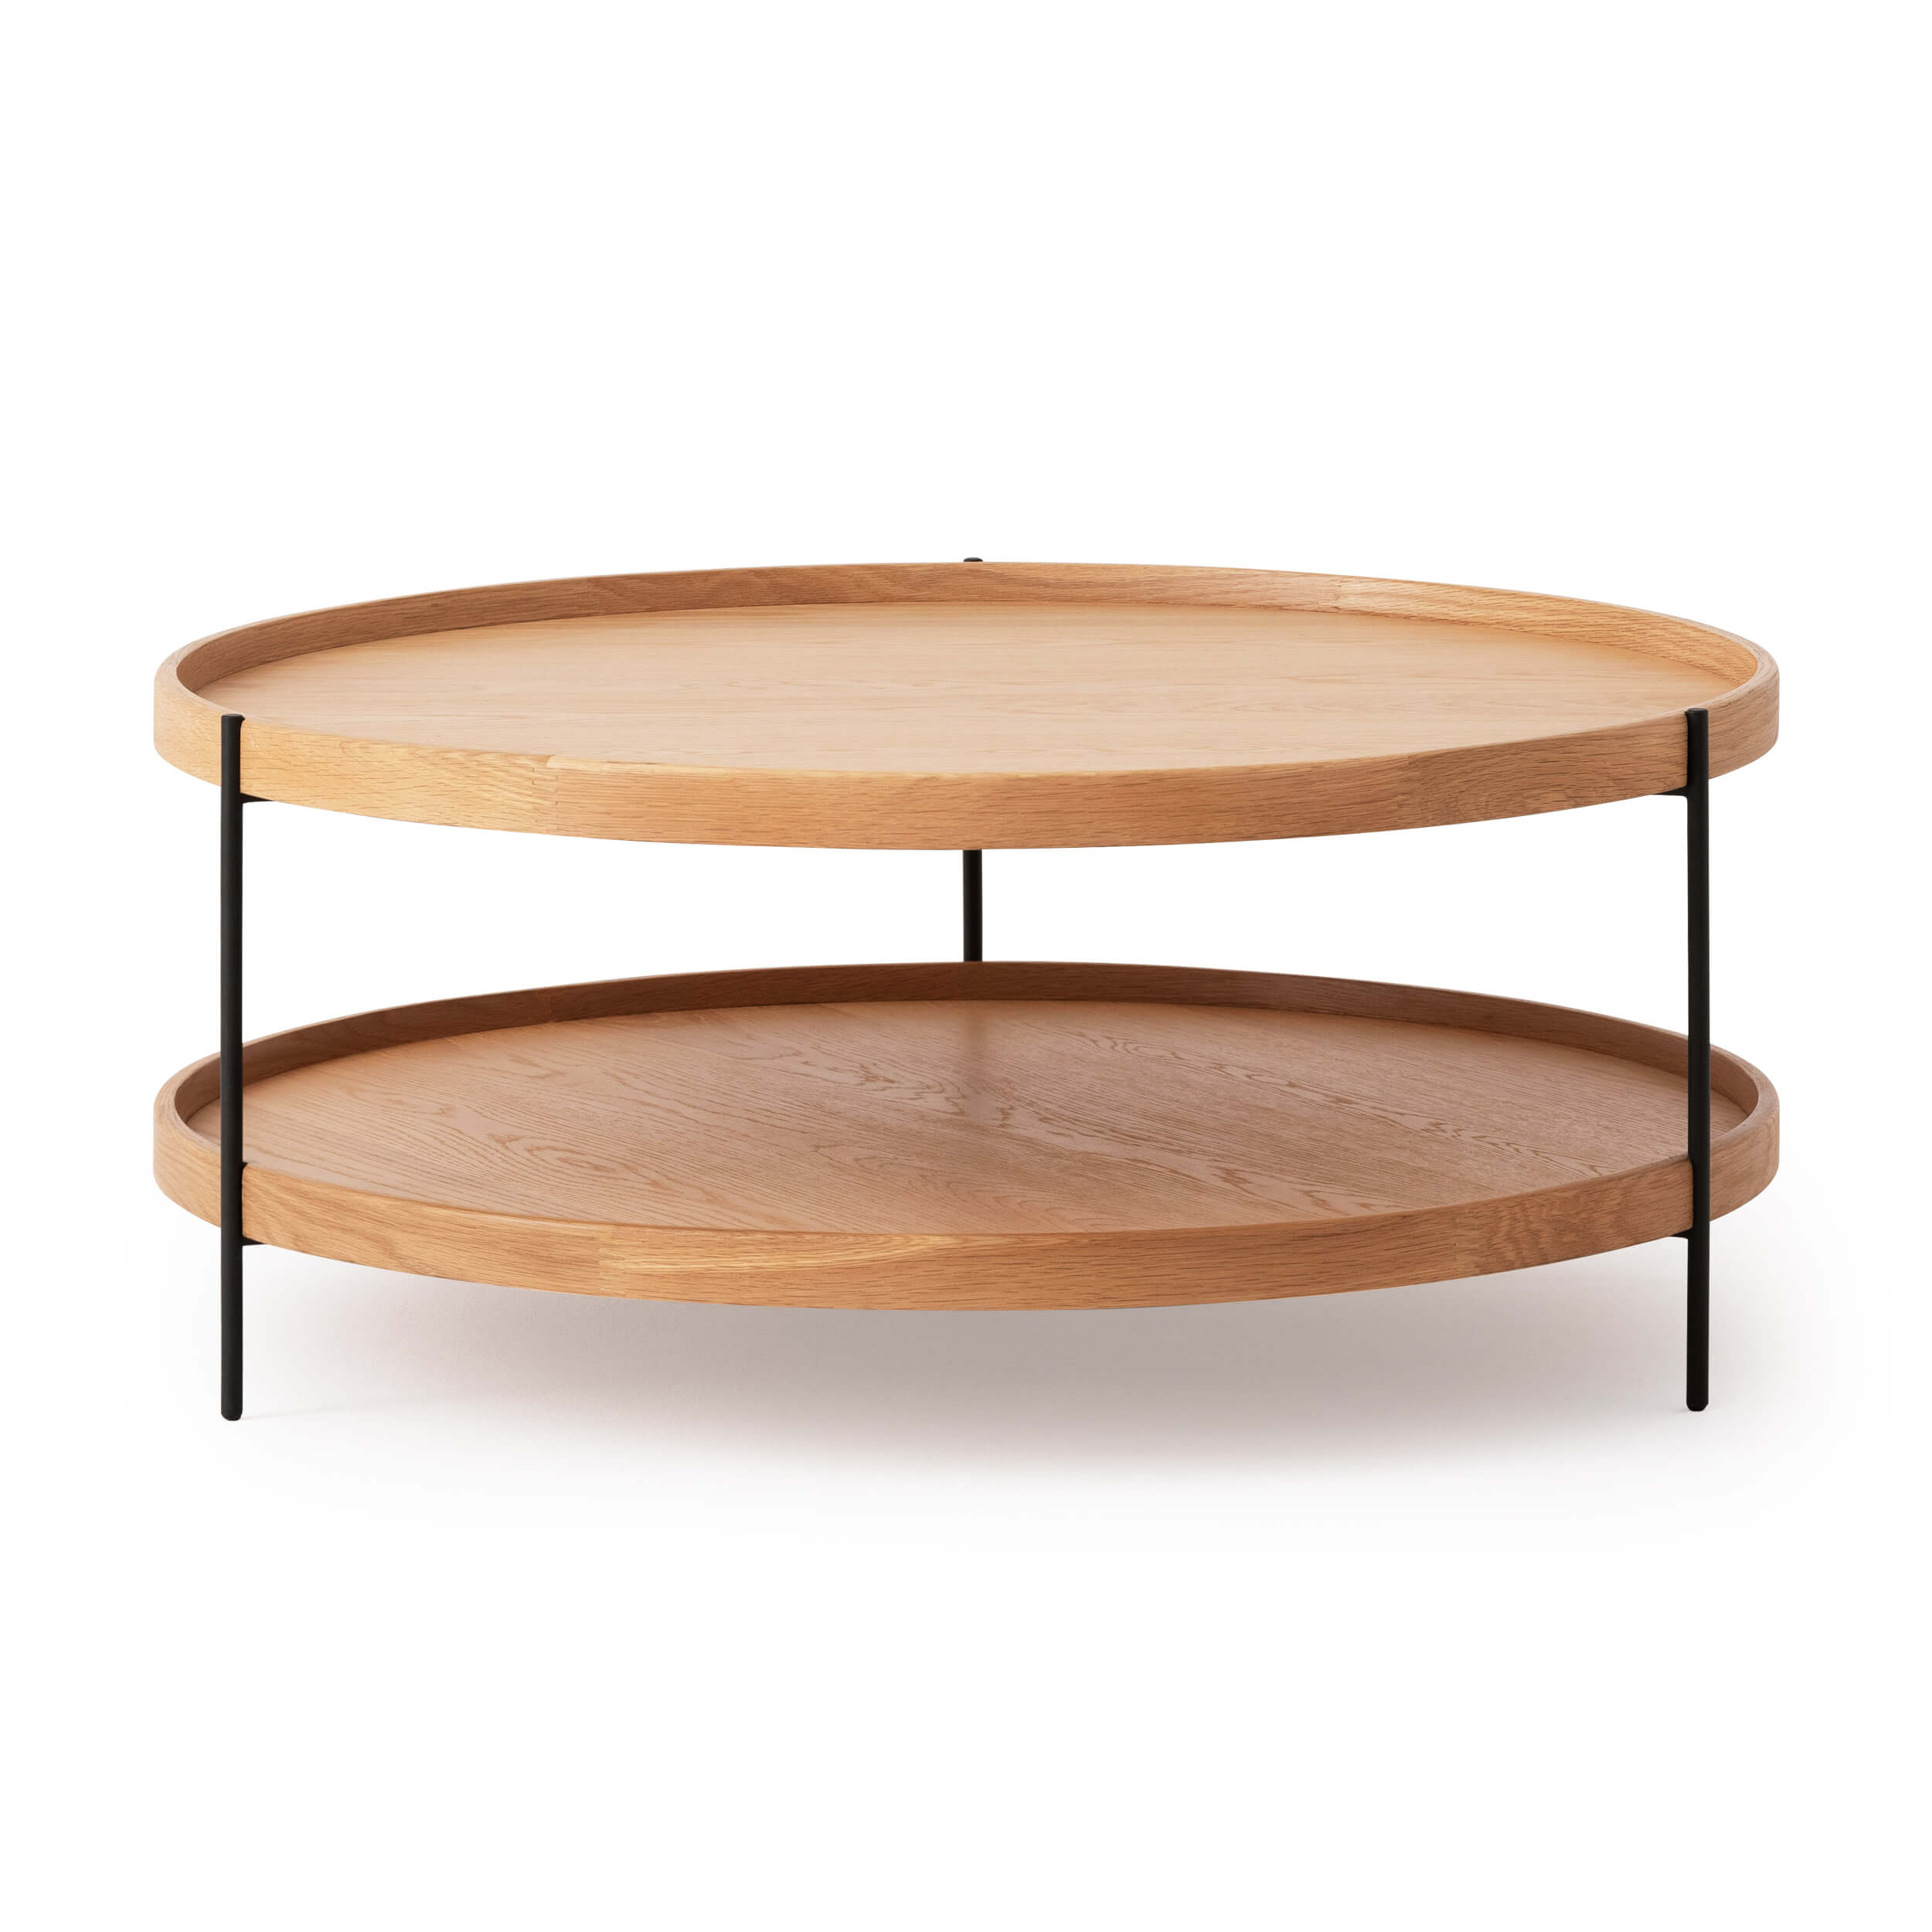 Sage Round Coffee Table | EQ3 Contemporary Coffee Table